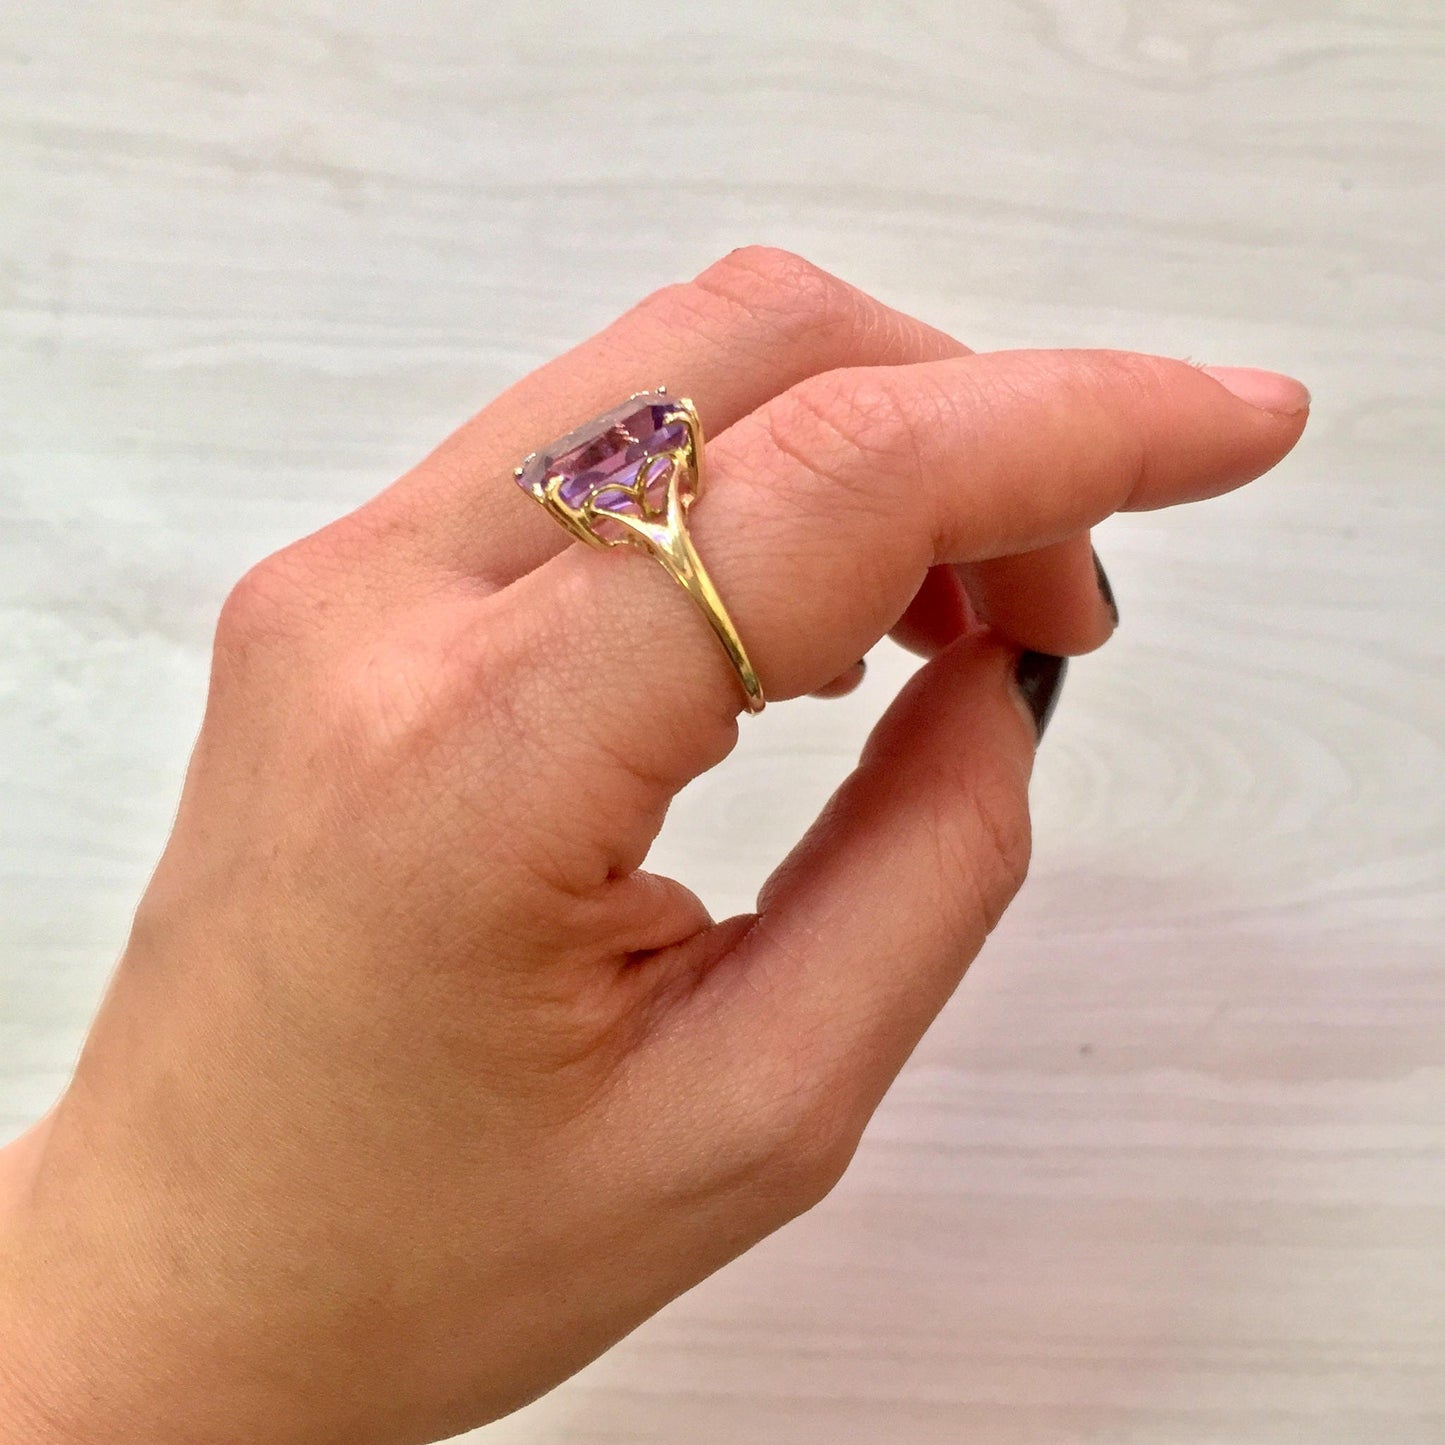 An emerald cut amethyst gemstone set in a 14 karat yellow gold ring, held between a person's fingers showcasing the ring's elegant design and vibrant purple color of the amethyst.